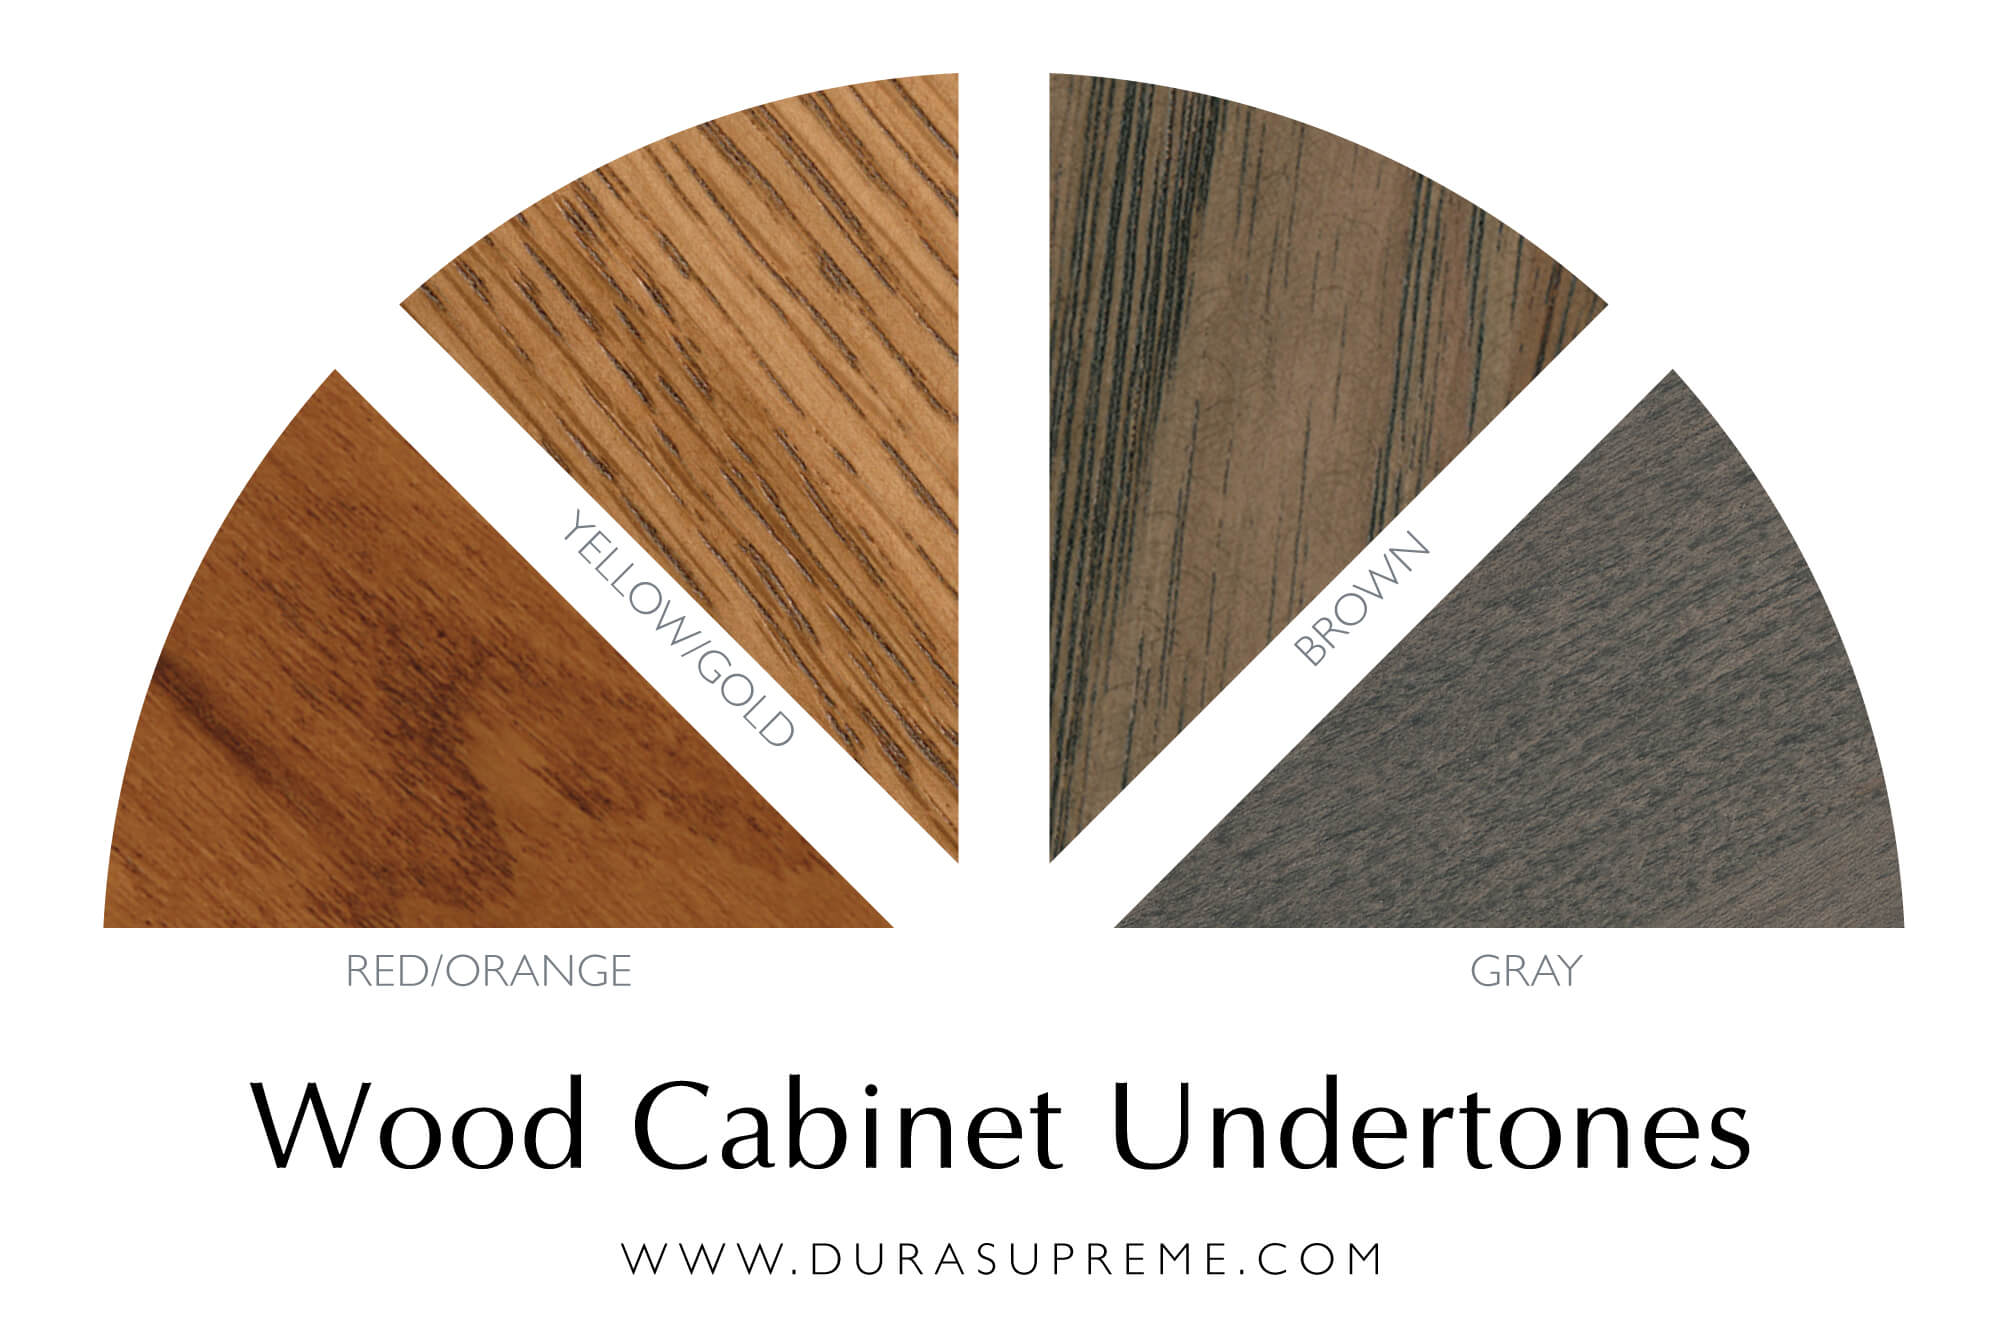 The color wheel of wood cabinet stains and their undertones. Red/Orange, Yellow/Gold, Brown (True-Brown), and Gray.